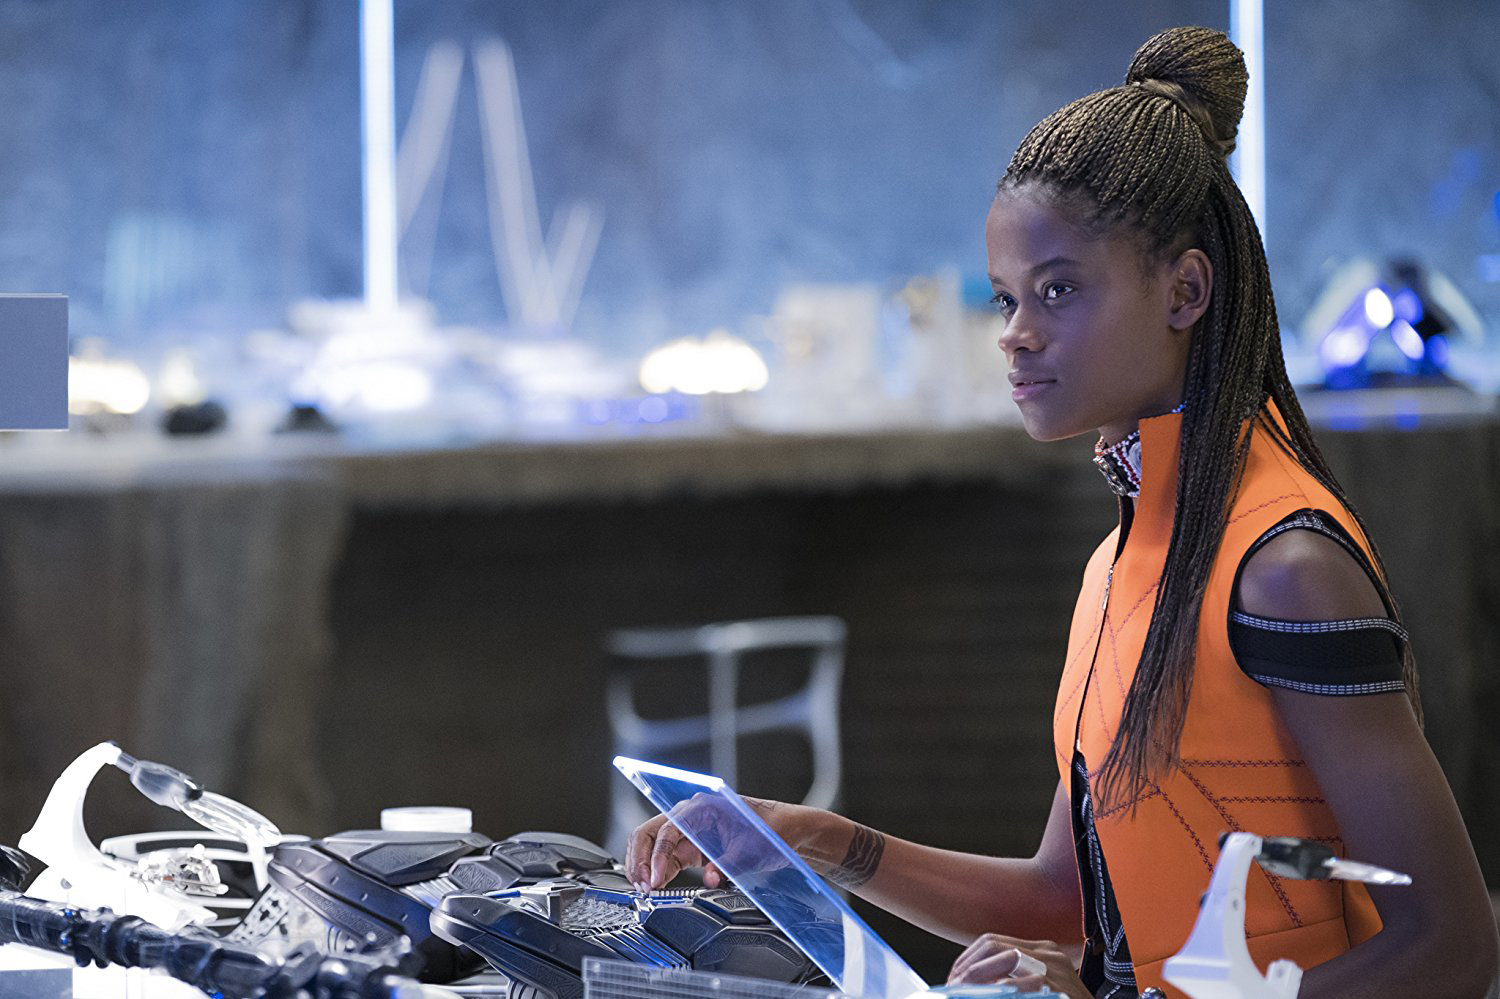 King T'Challa's younger sister, Shuri, is the chief designer and creator of the latest technology in the nation of Wakanda in the Marvel blockbuster "Black Panther." Marvel Films photo